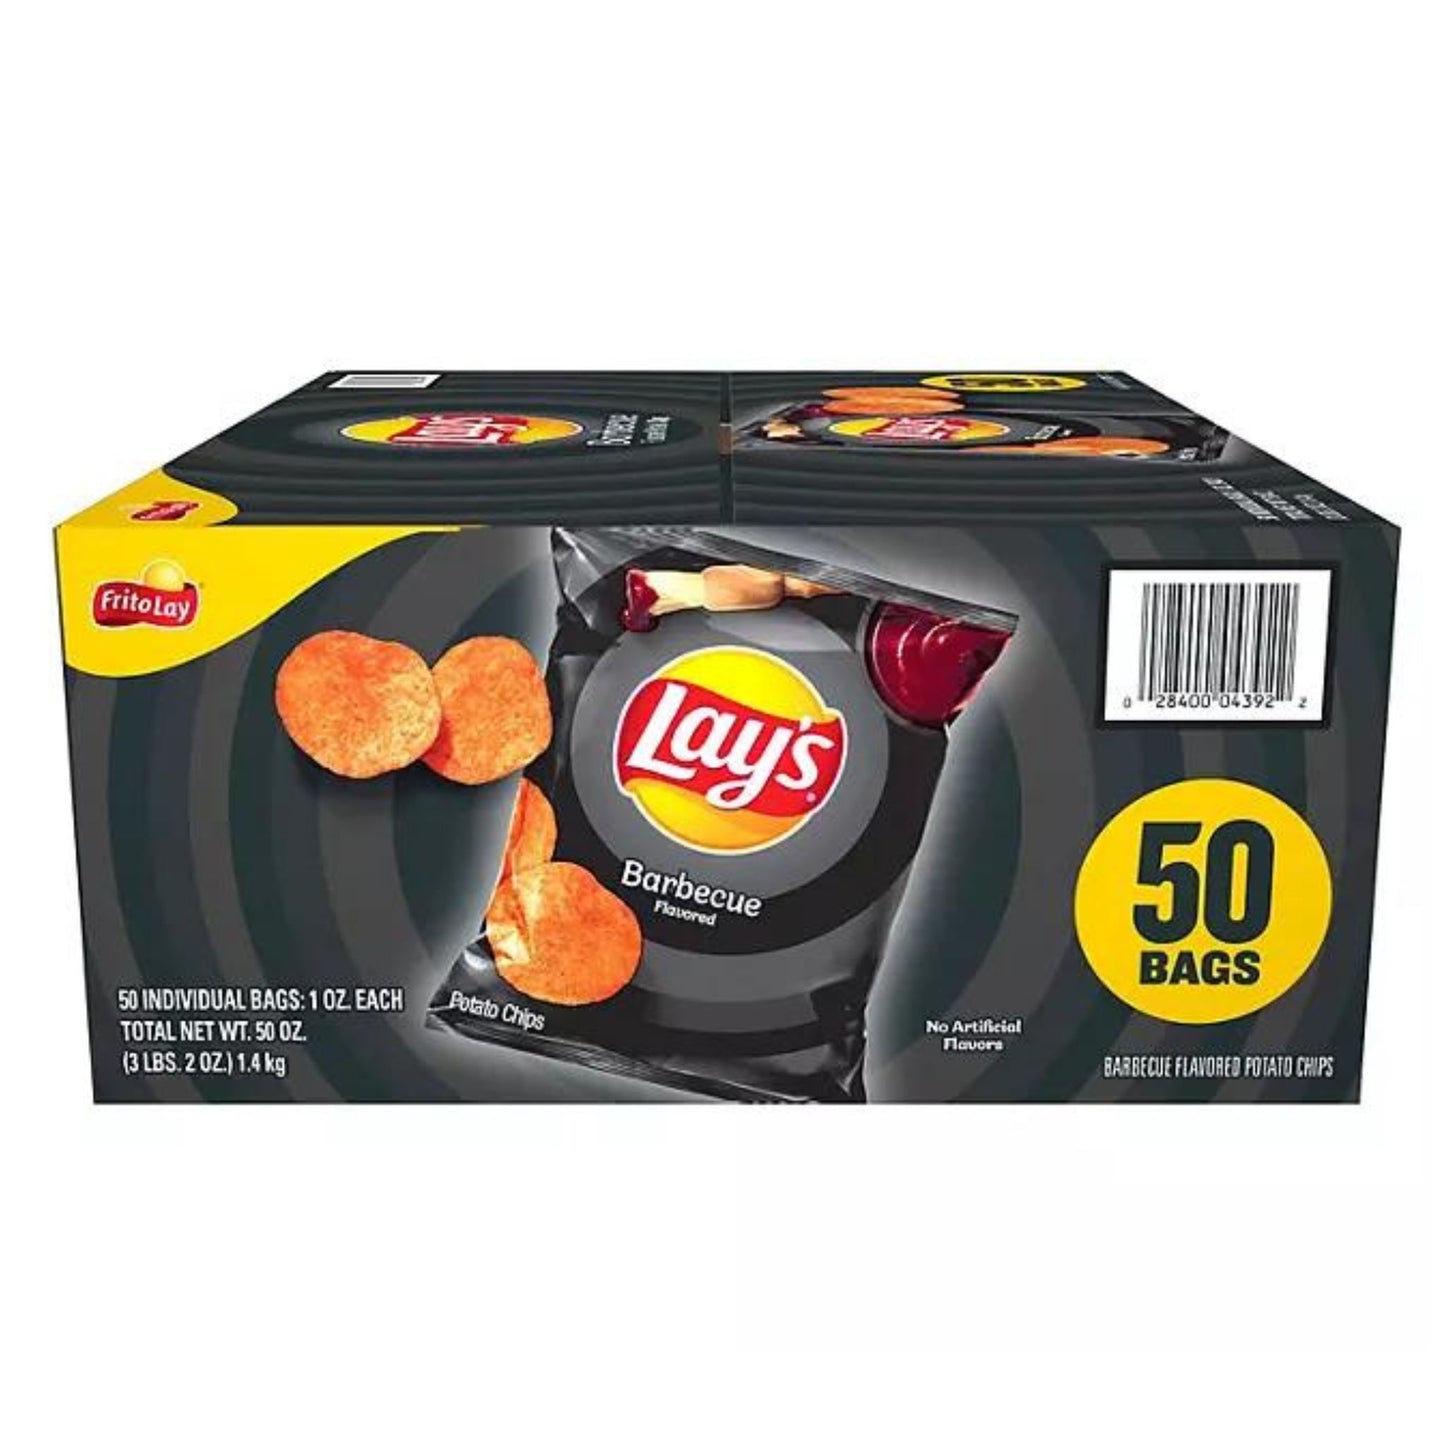 Lay's Barbecue Potato Chips 1oz. 50bags per Pack